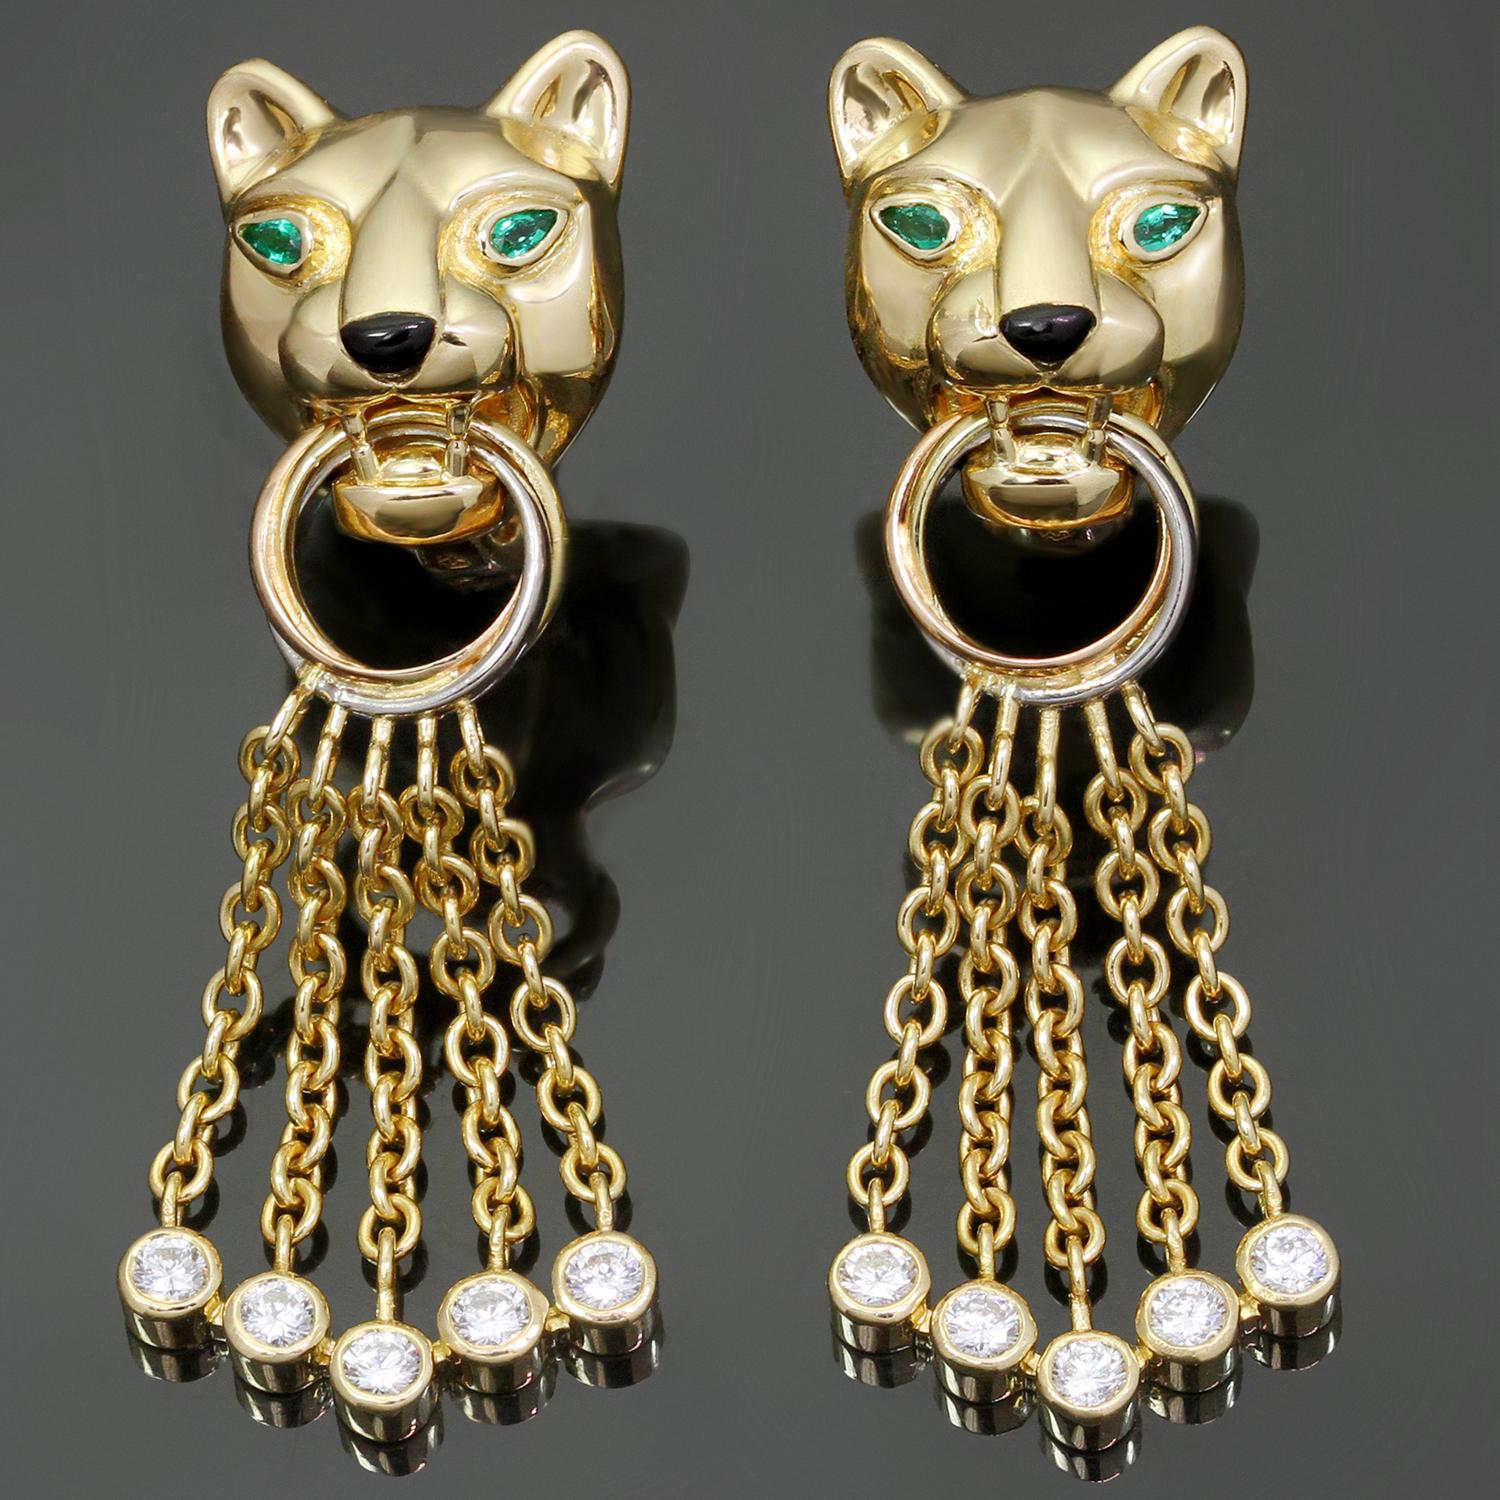 These iconic Panthère de Cartier clip-on drop earrings feature the classic panther design crafted in 18k yellow gold and accented with green emerald eyes and black lacquer nose and set brilliant-cut round D-F VVS1-VVS2 diamonds. Made in France circa